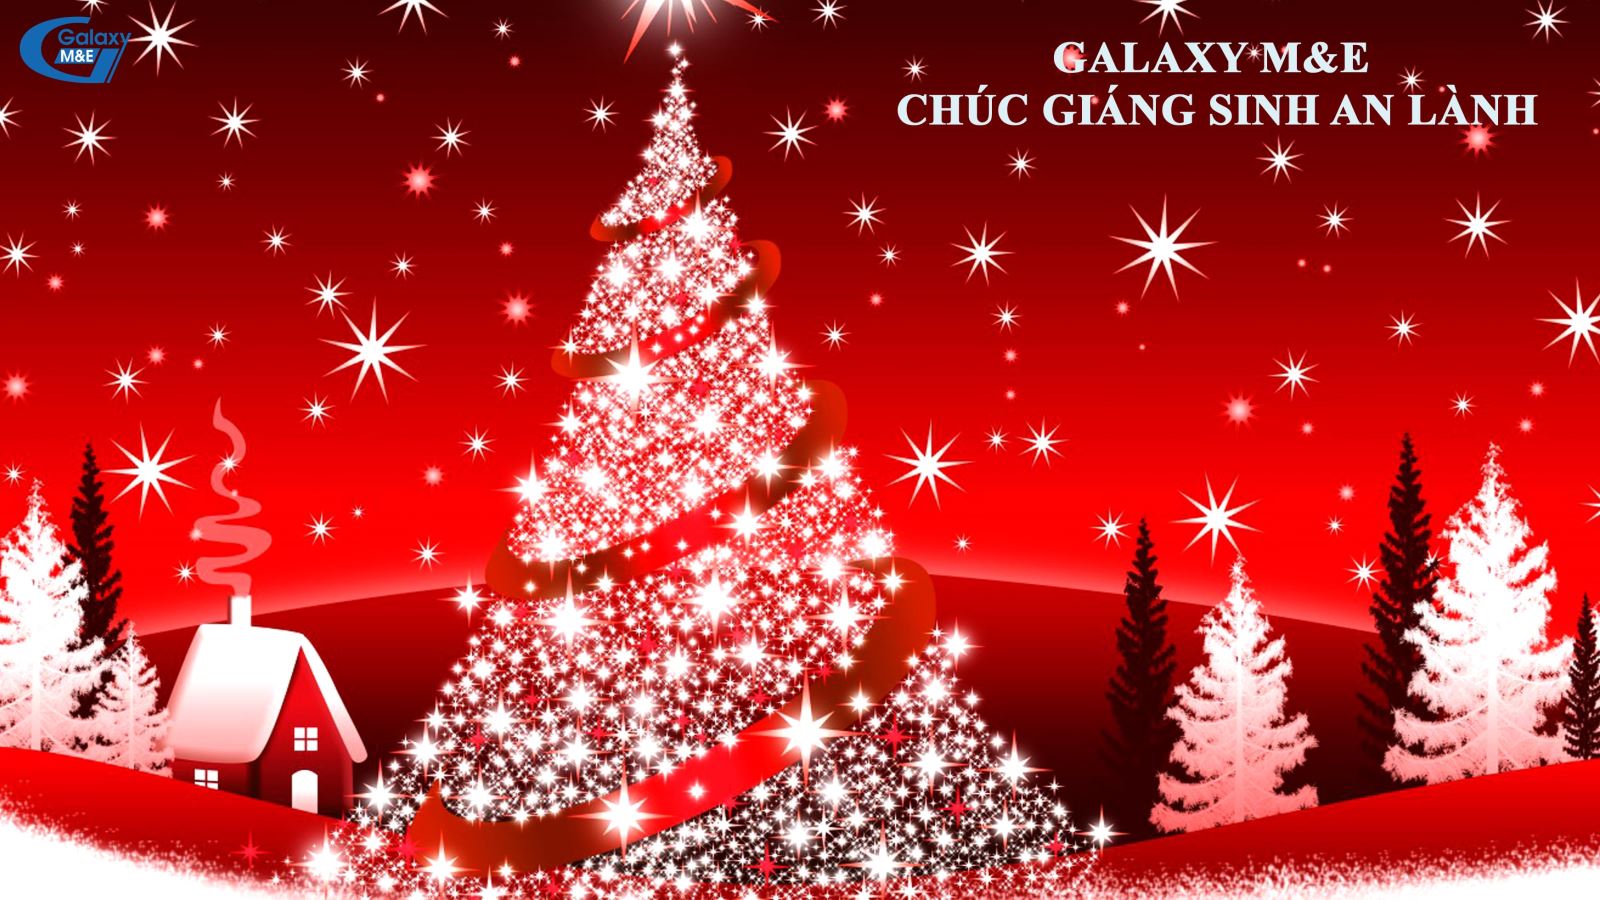 Galaxy M&E wishes a merry Christmas to everyone